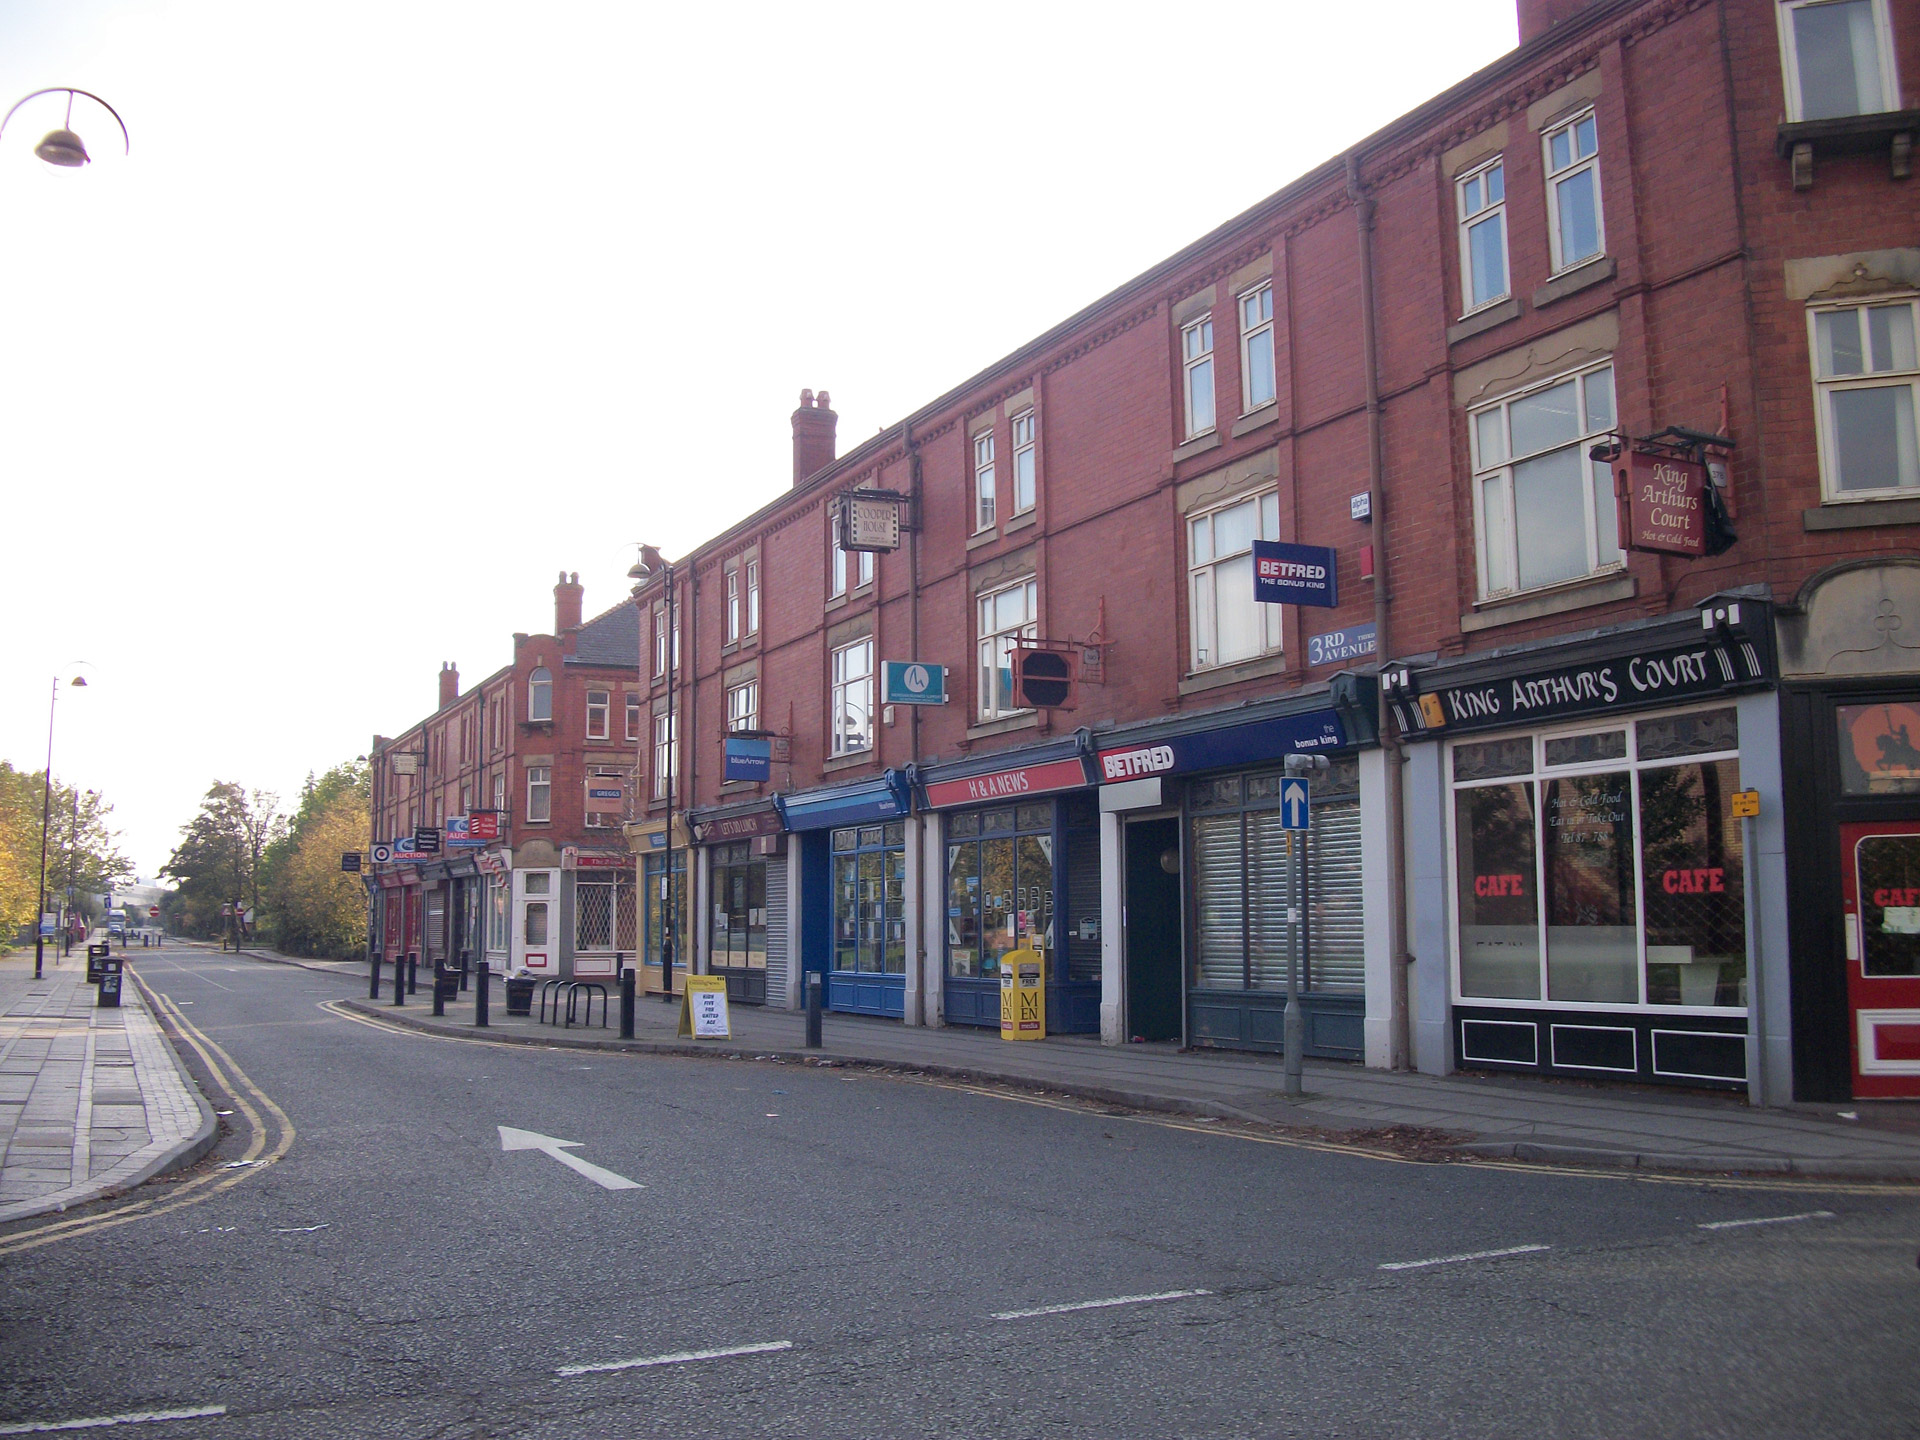 3rd avenue trafford park shops - this was once a place booming with people houses and more